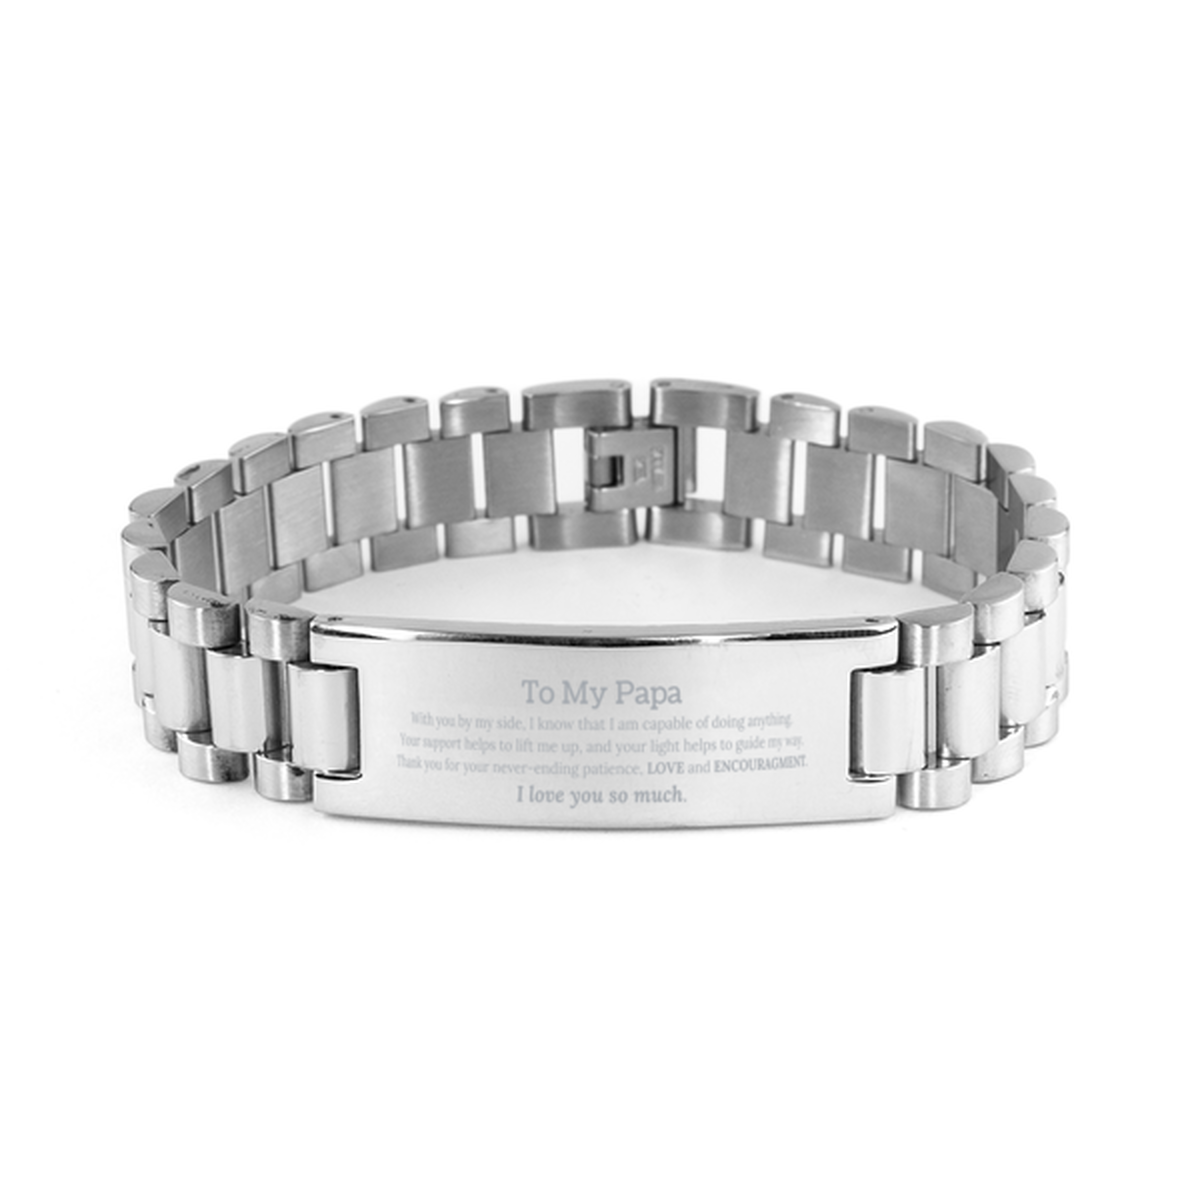 Appreciation Papa Ladder Stainless Steel Bracelet Gifts, To My Papa Birthday Christmas Wedding Keepsake Gifts for Papa With you by my side, I know that I am capable of doing anything. I love you so much